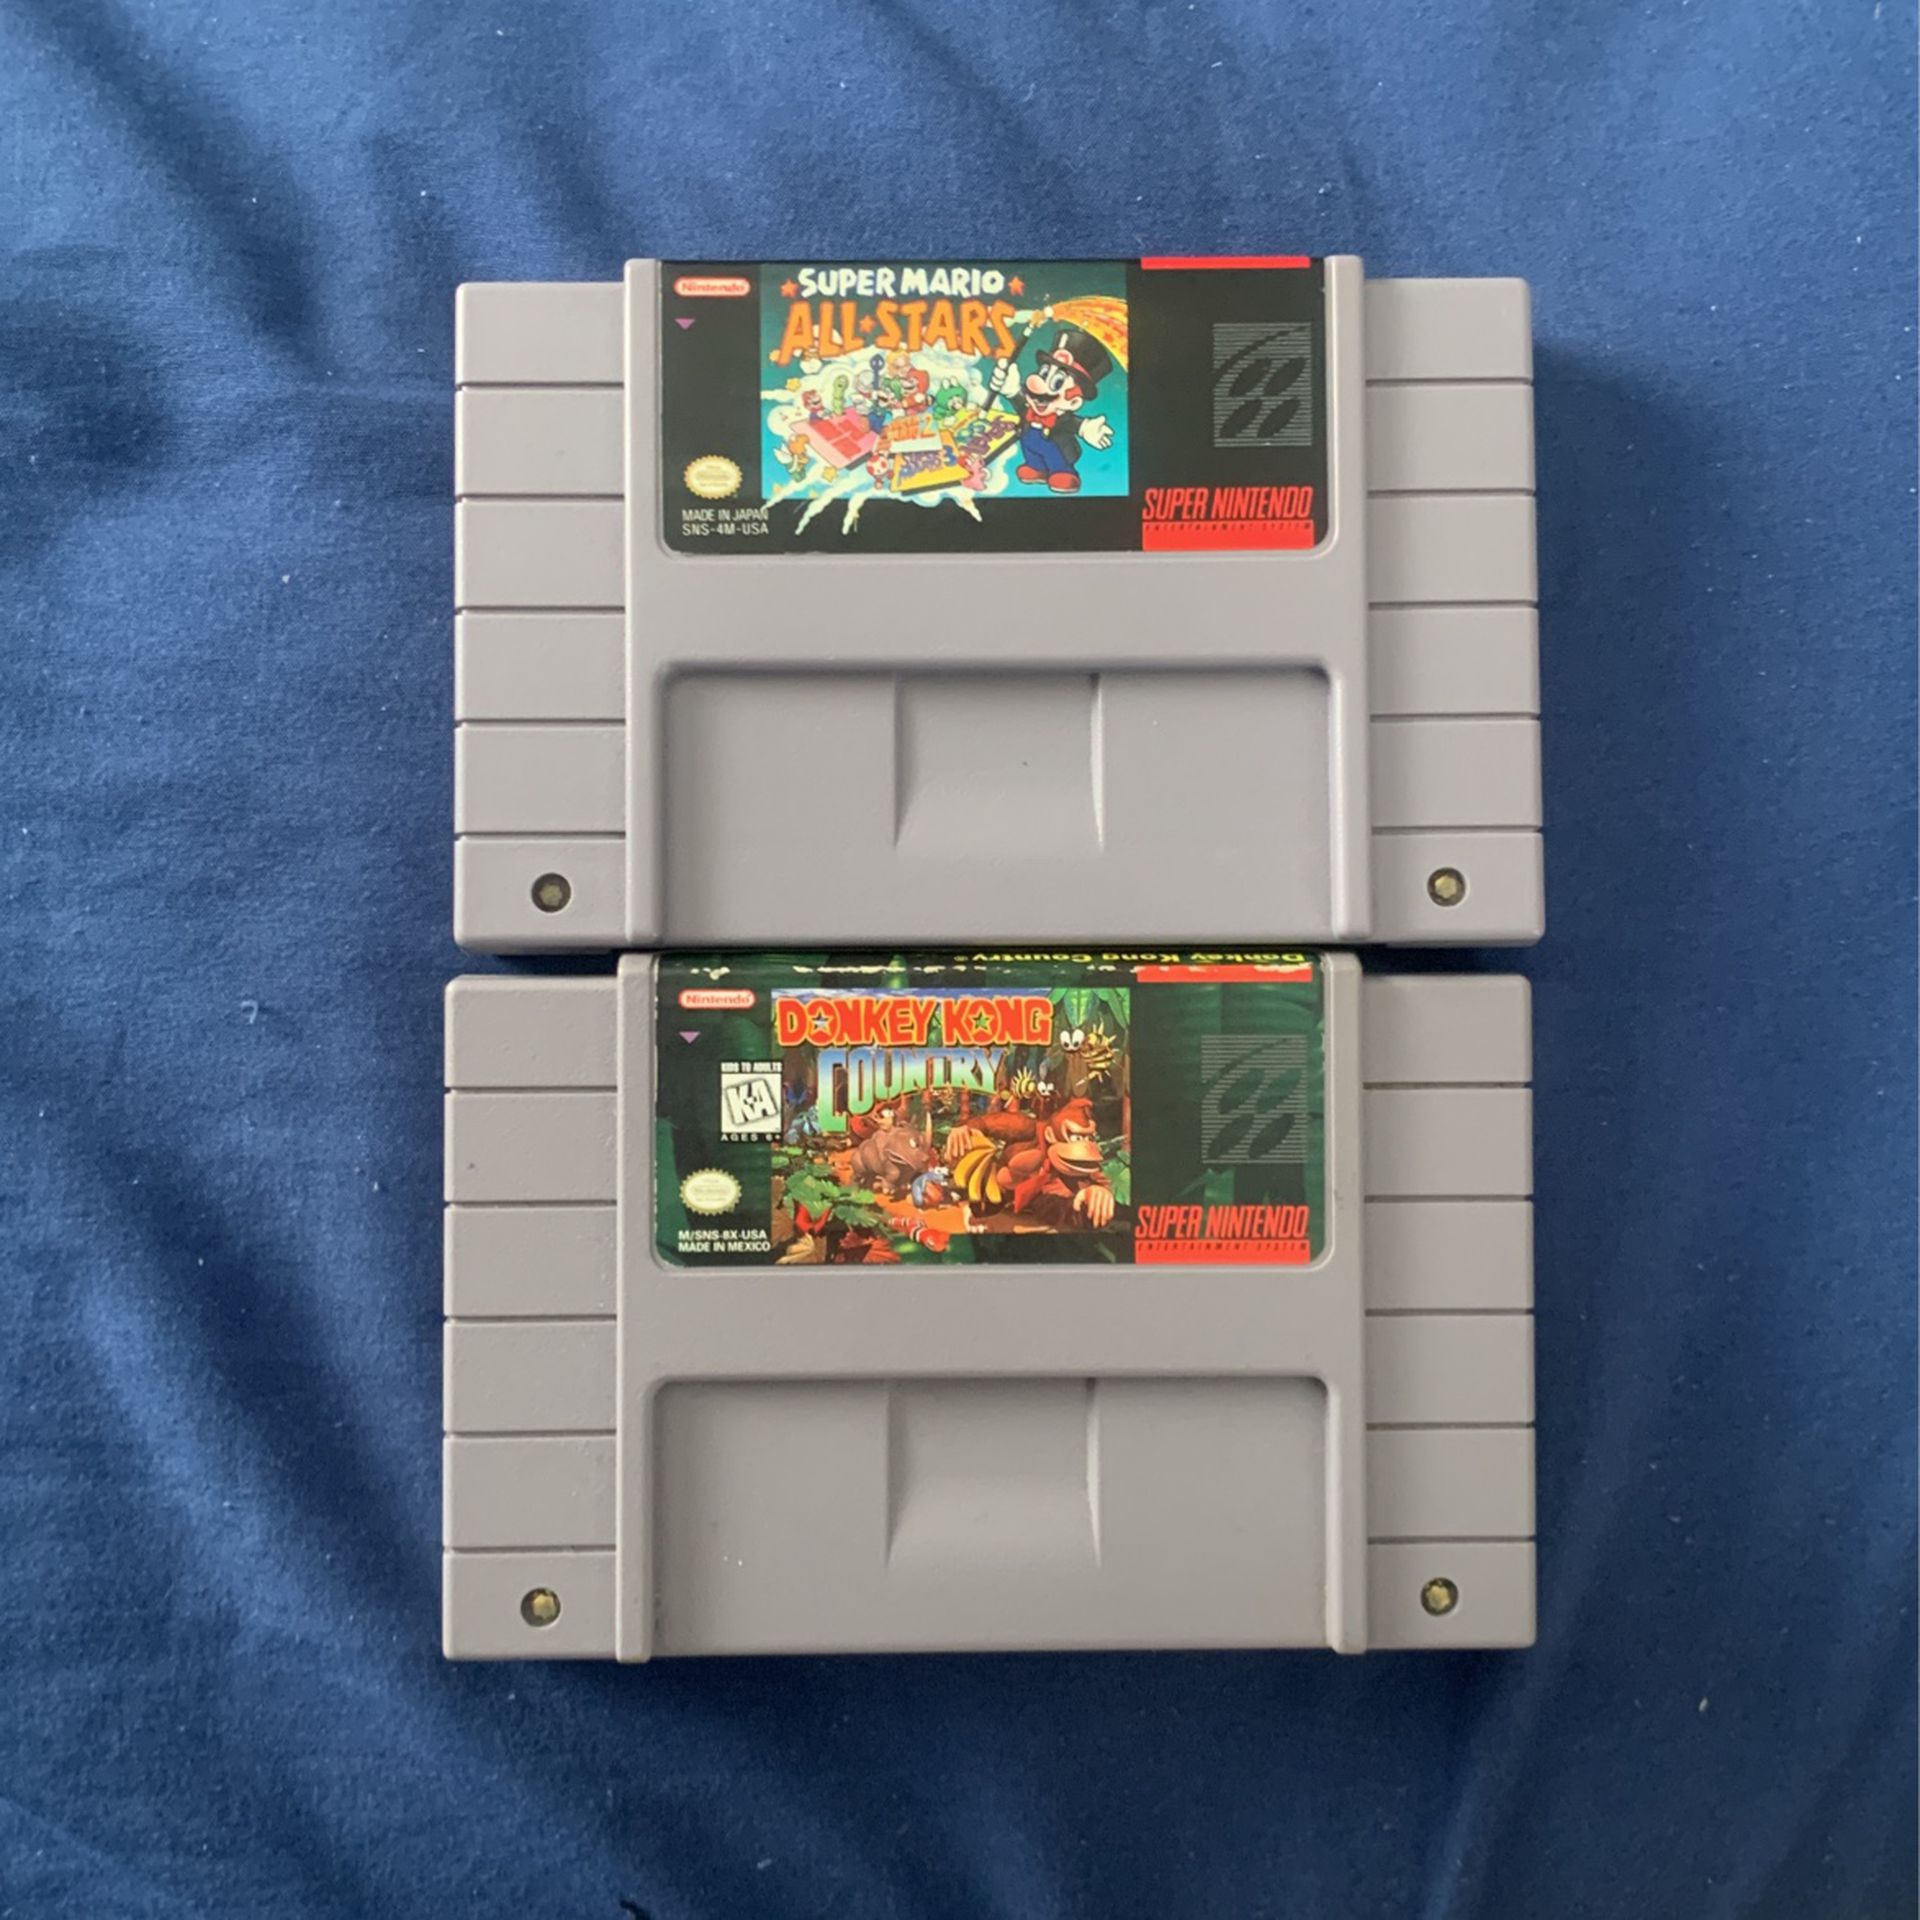 Super Mario All Stars and Donkey Kong Country for Super Nintendo Video Game